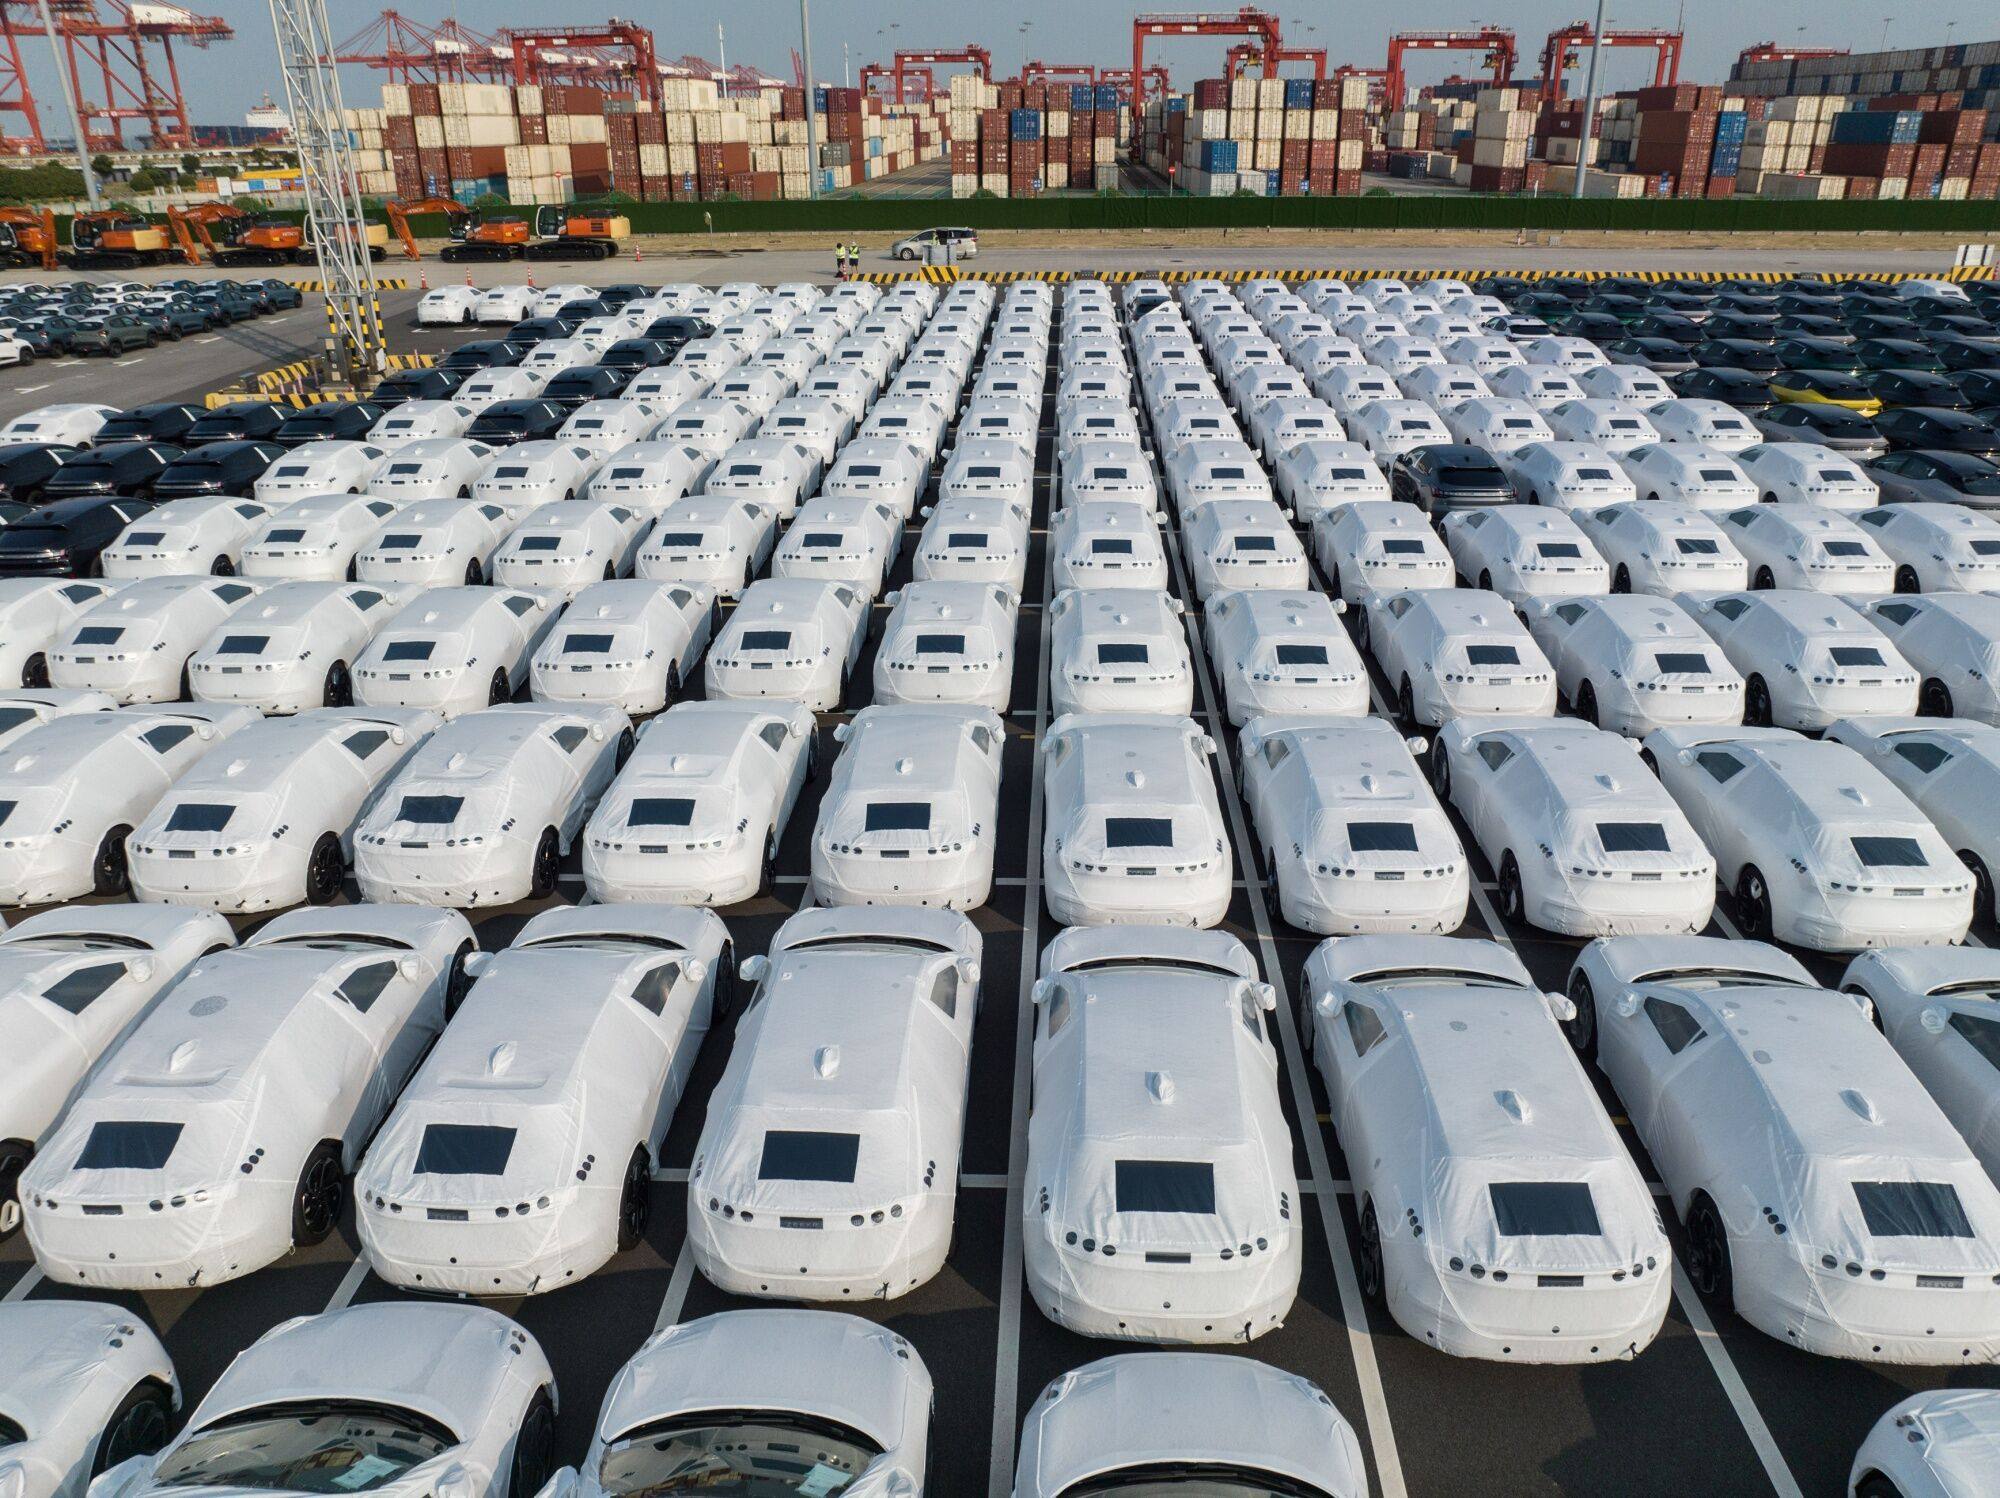 Geely electric vehicles bound for shipment to Europe at the Port of Taicang in Jiangsu Province, China. Photo: Bloomberg